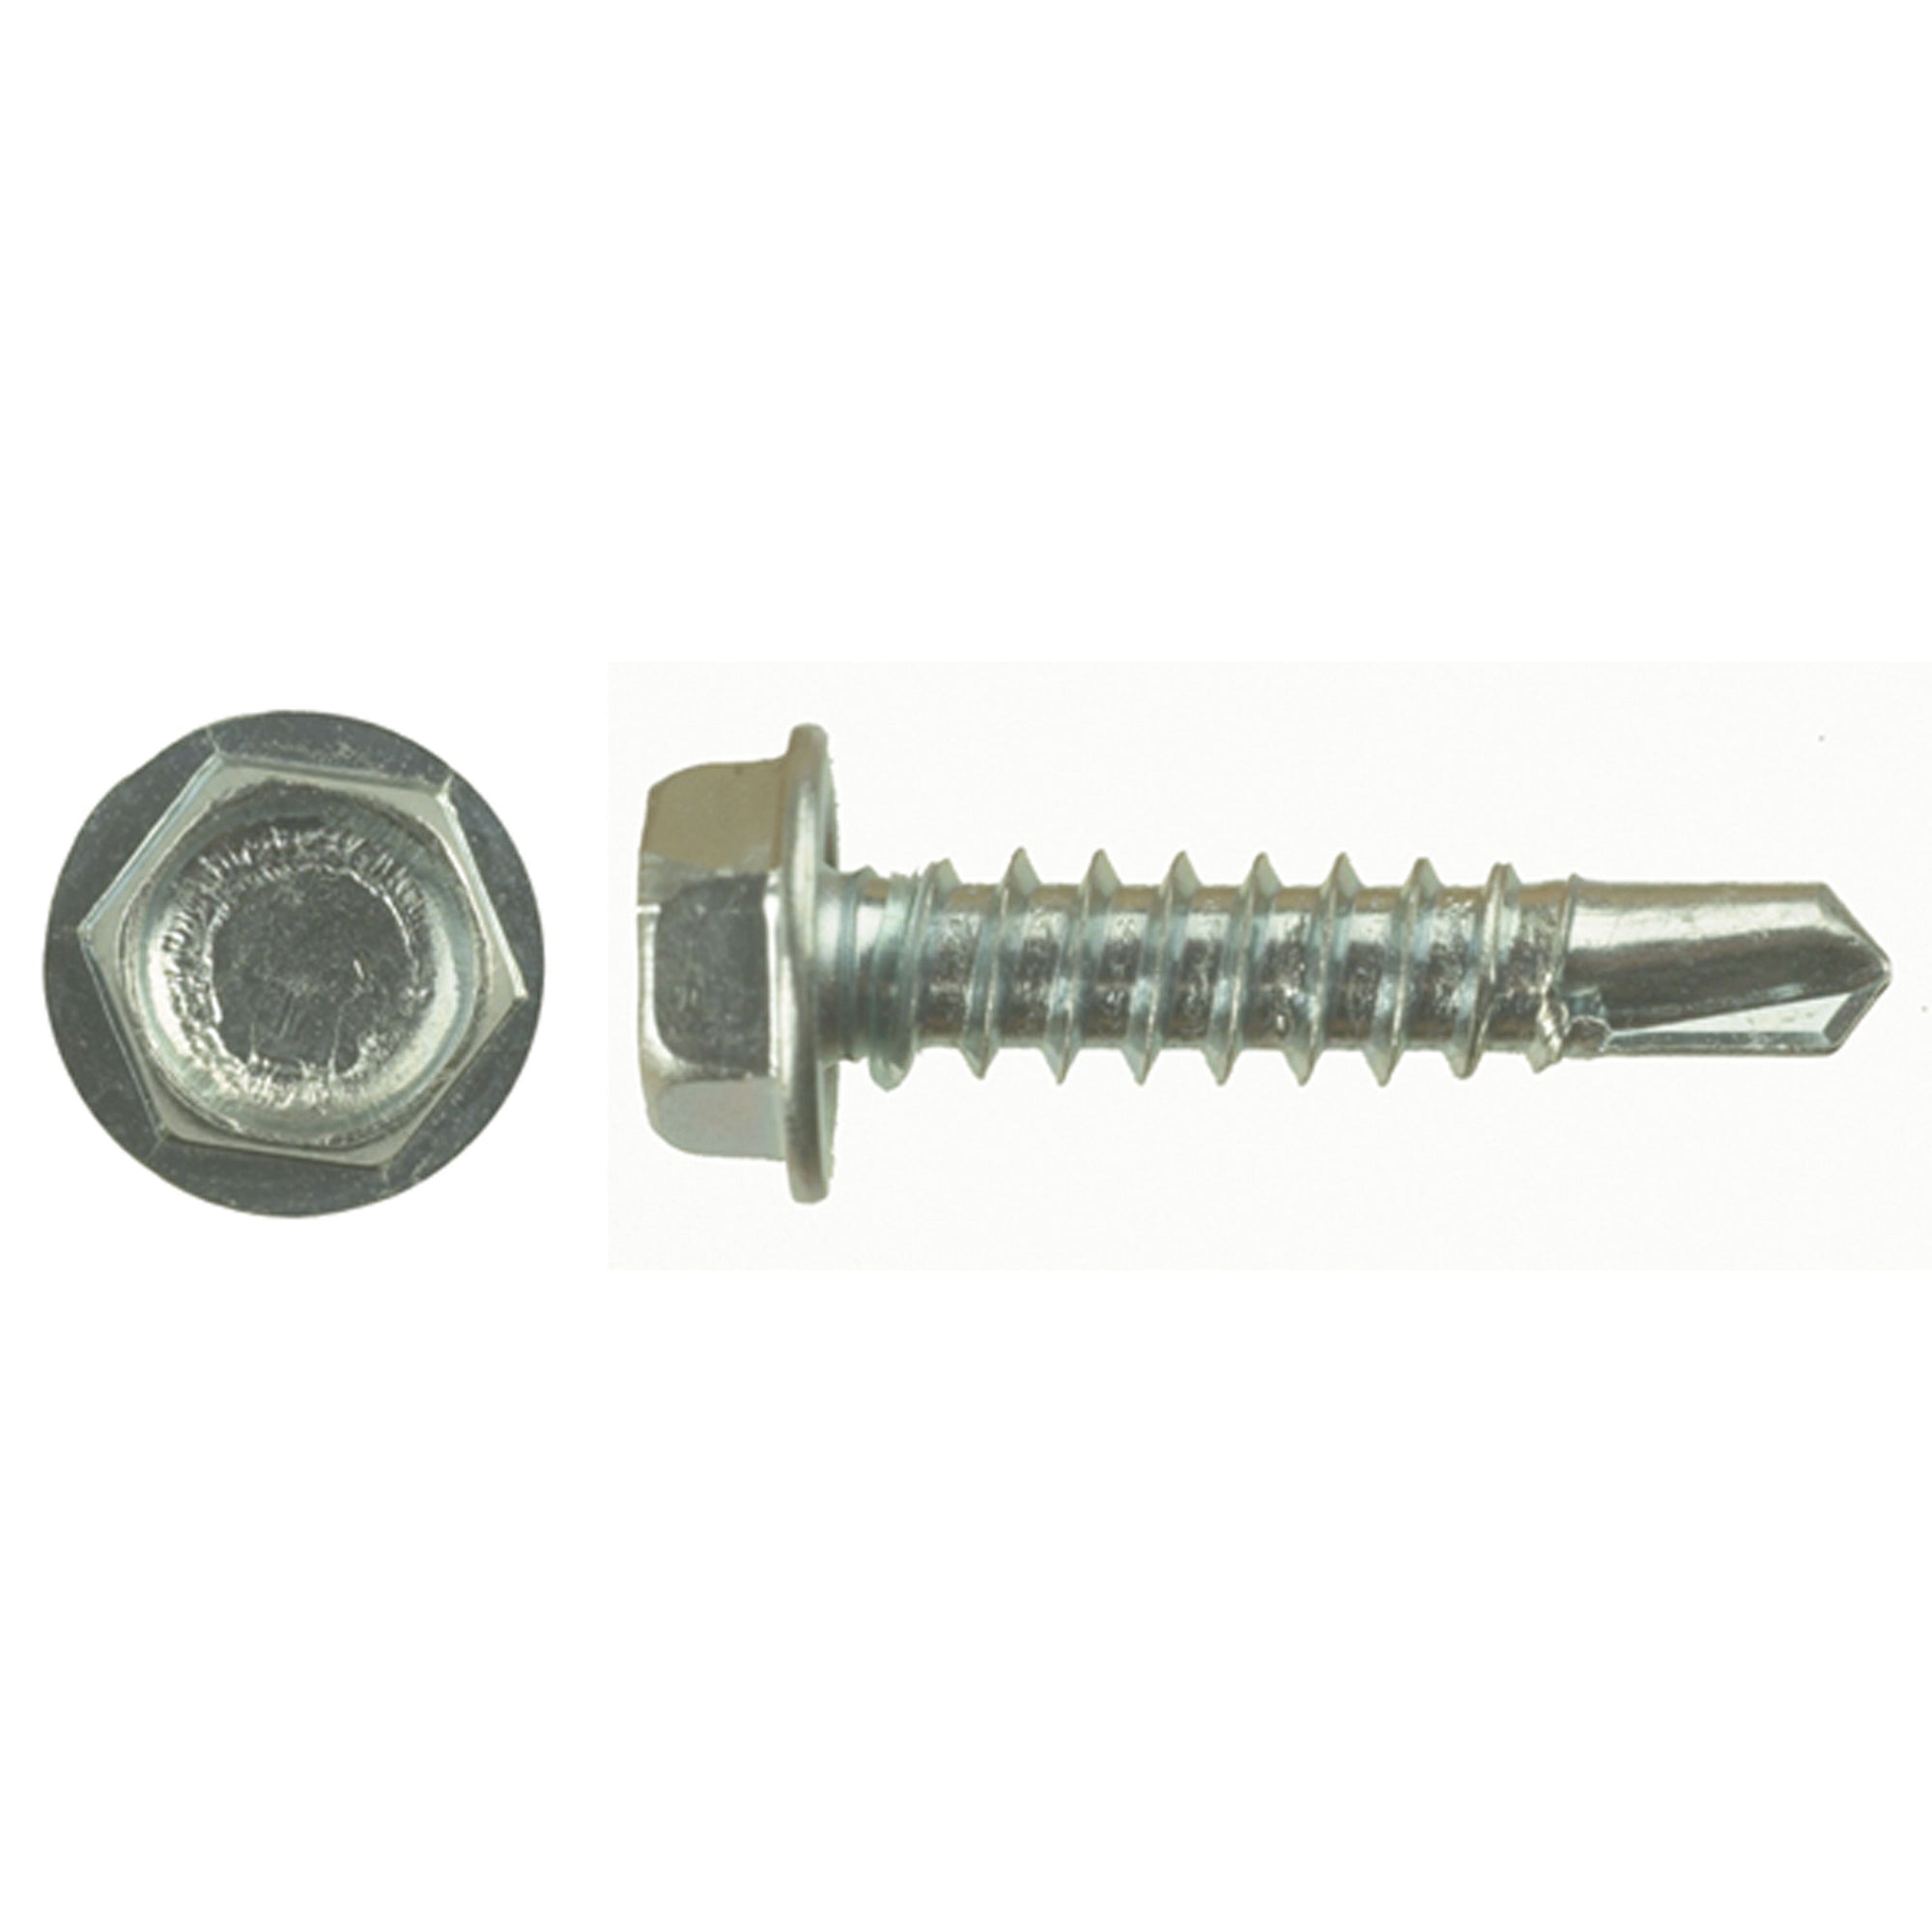 AP Products 012-DP500 8 X 1 Self-Tapping 1/4" Hex Head Screw, Pack of 500 - 1"